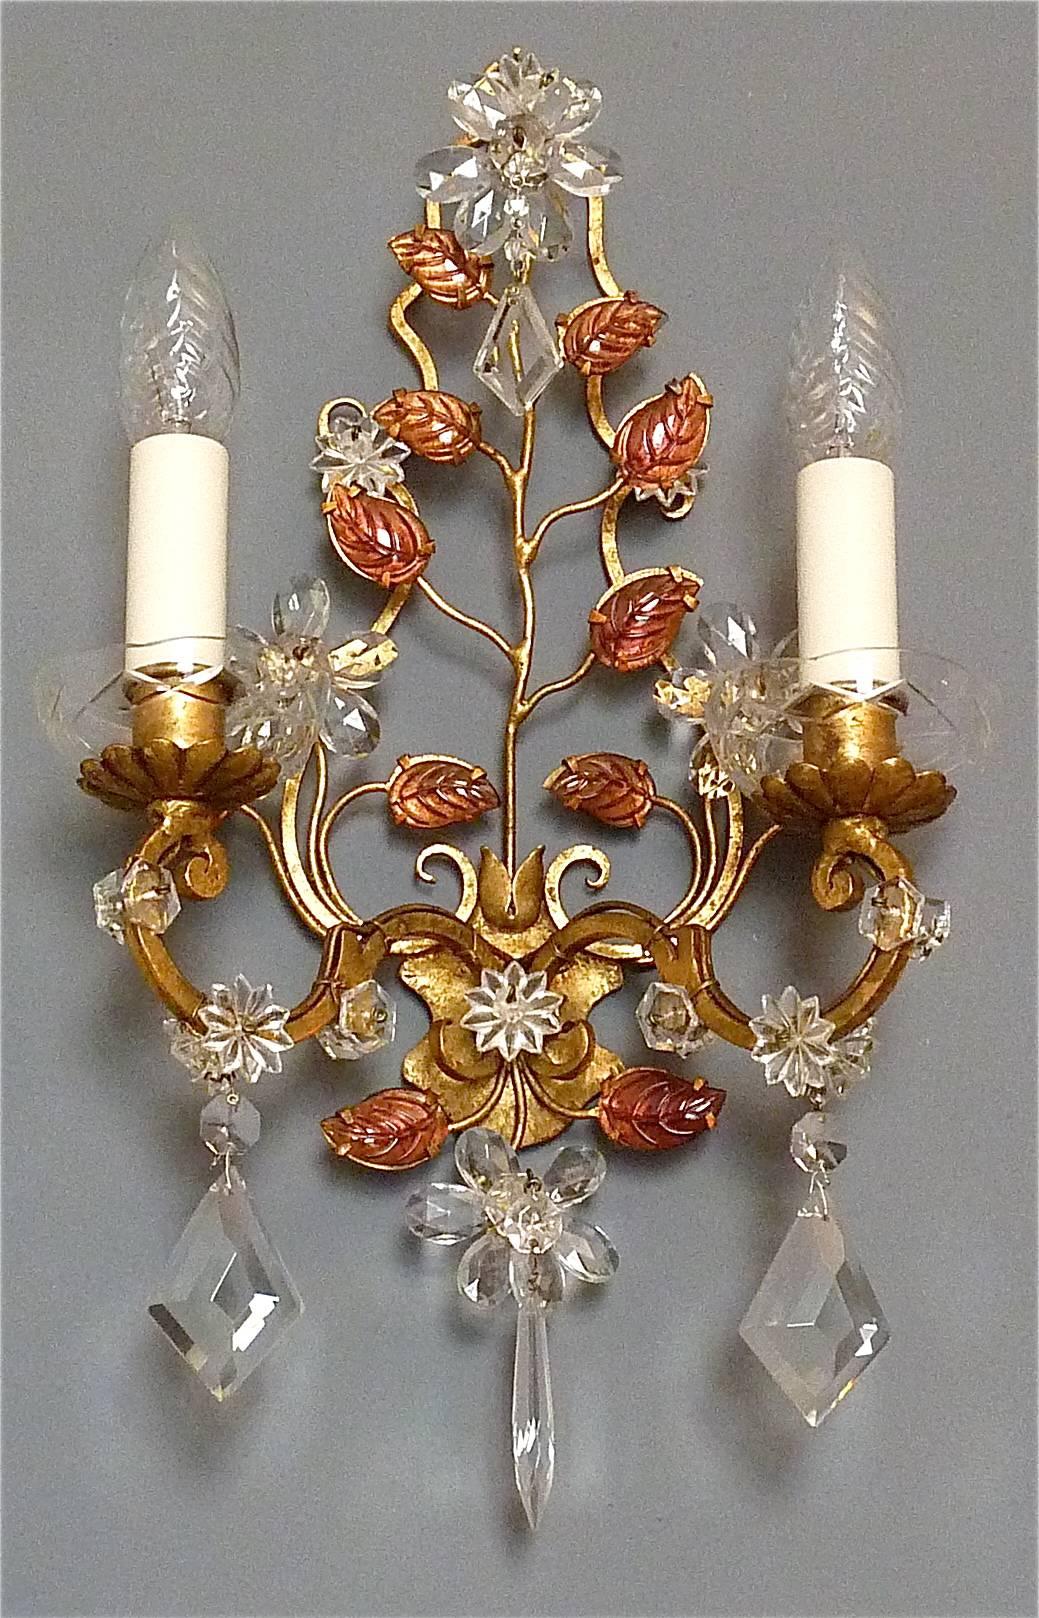 Refined pair of floral golden Maison Baguès Style leaf sconces, France circa 1950. They are made of gilt iron / metal and faceted crystal glass with sparkling glass beads forming amazing flowers and leaves. The beautiful two-light lamps stay in a